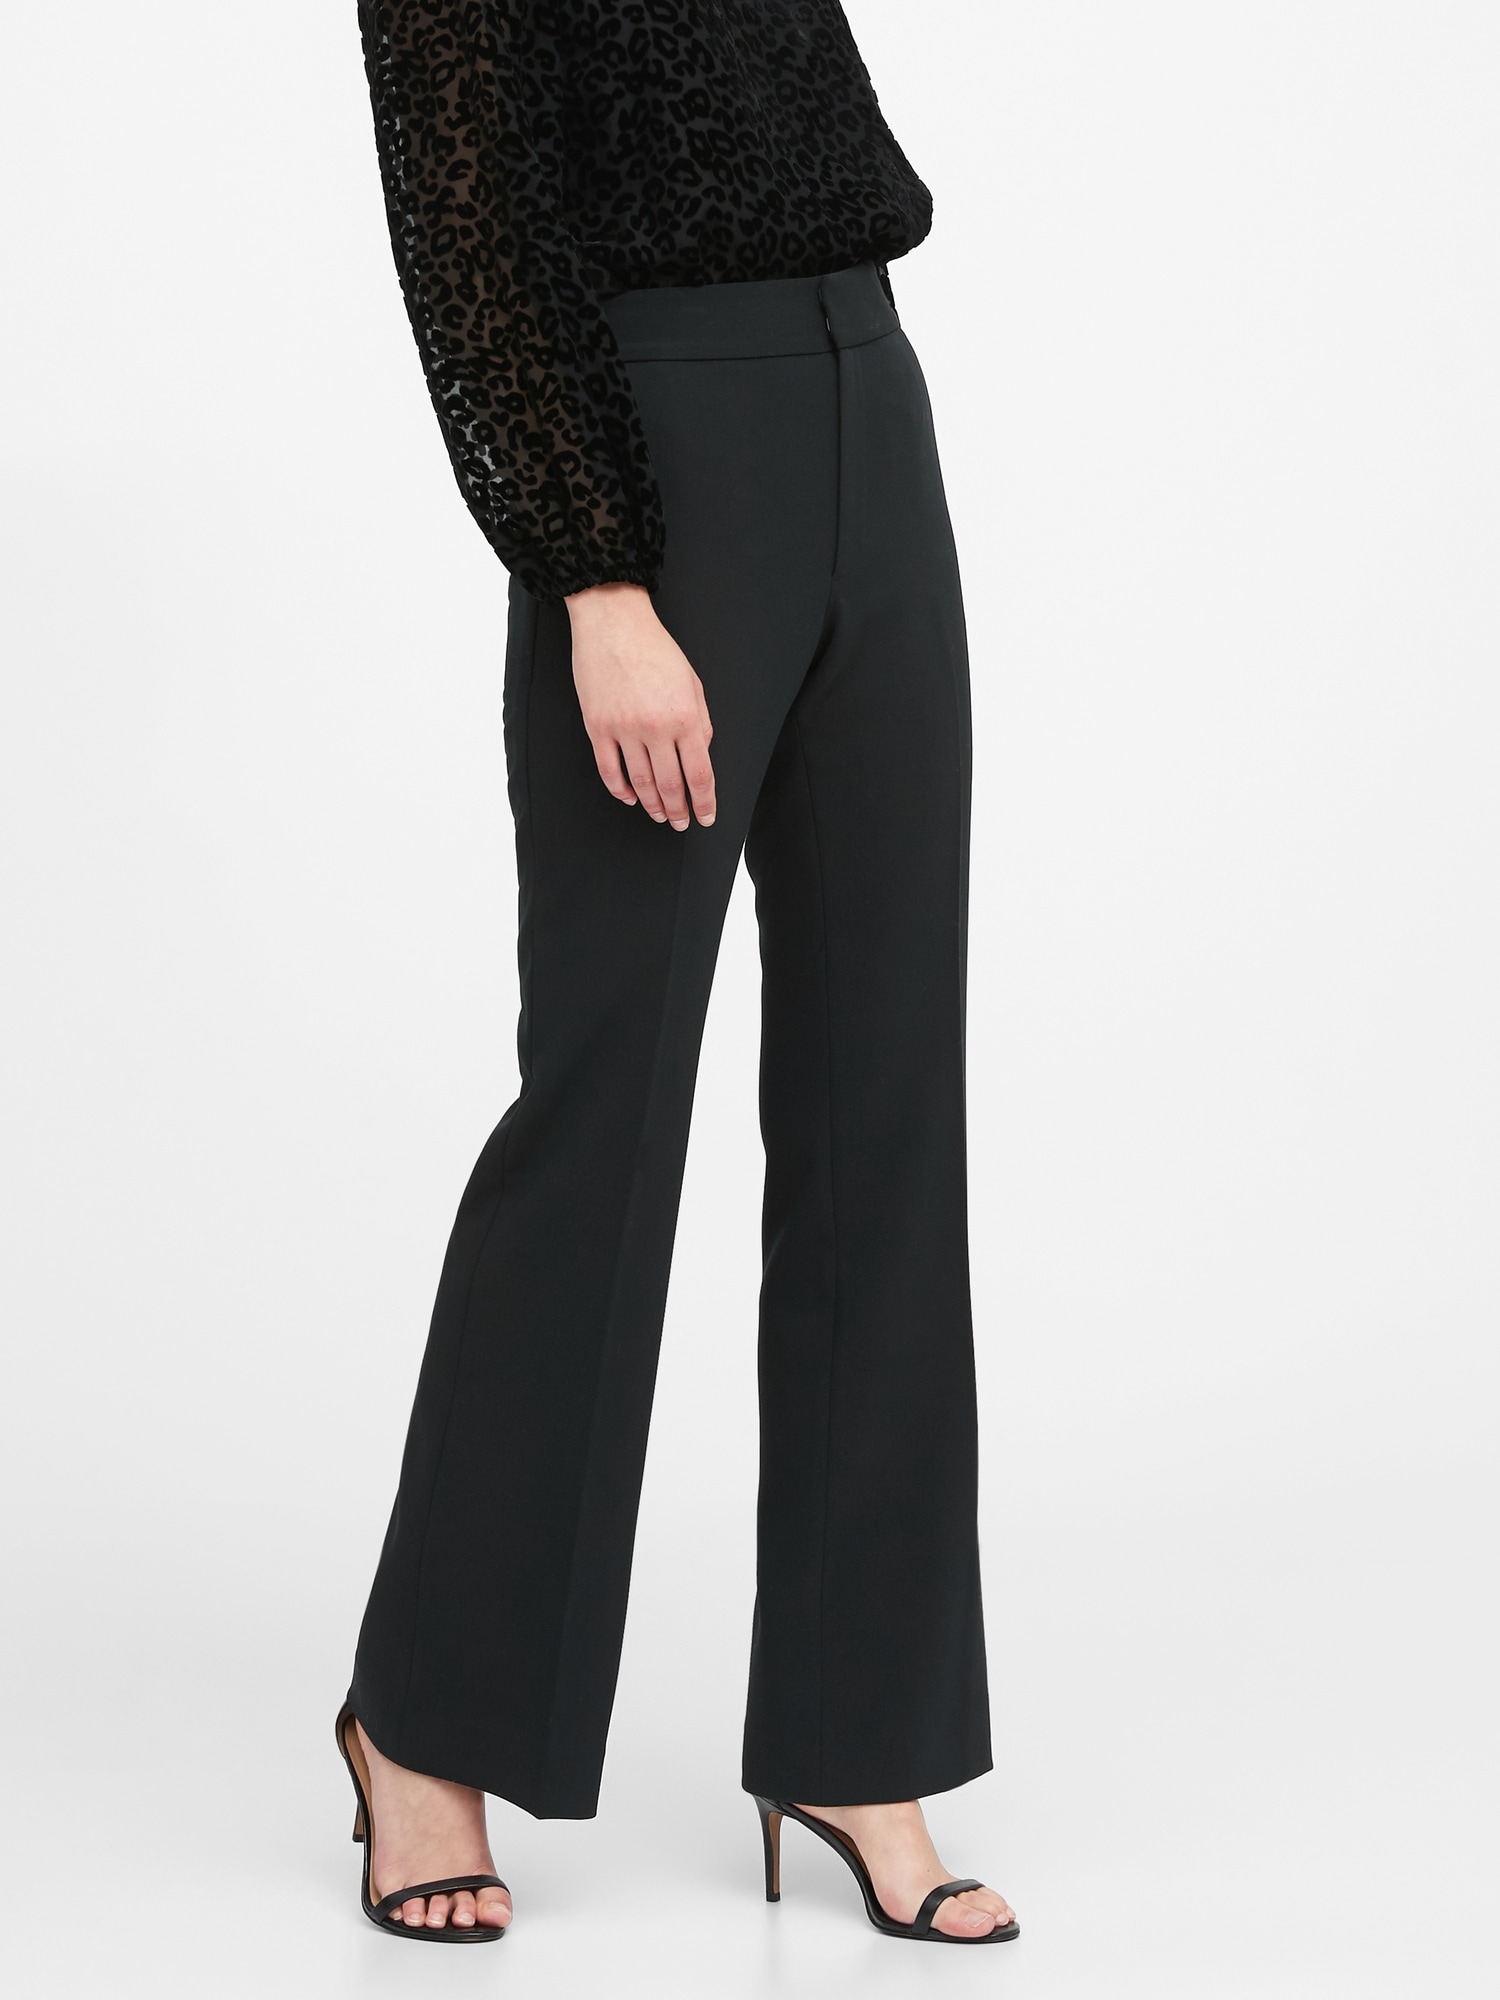 flared pants for petites